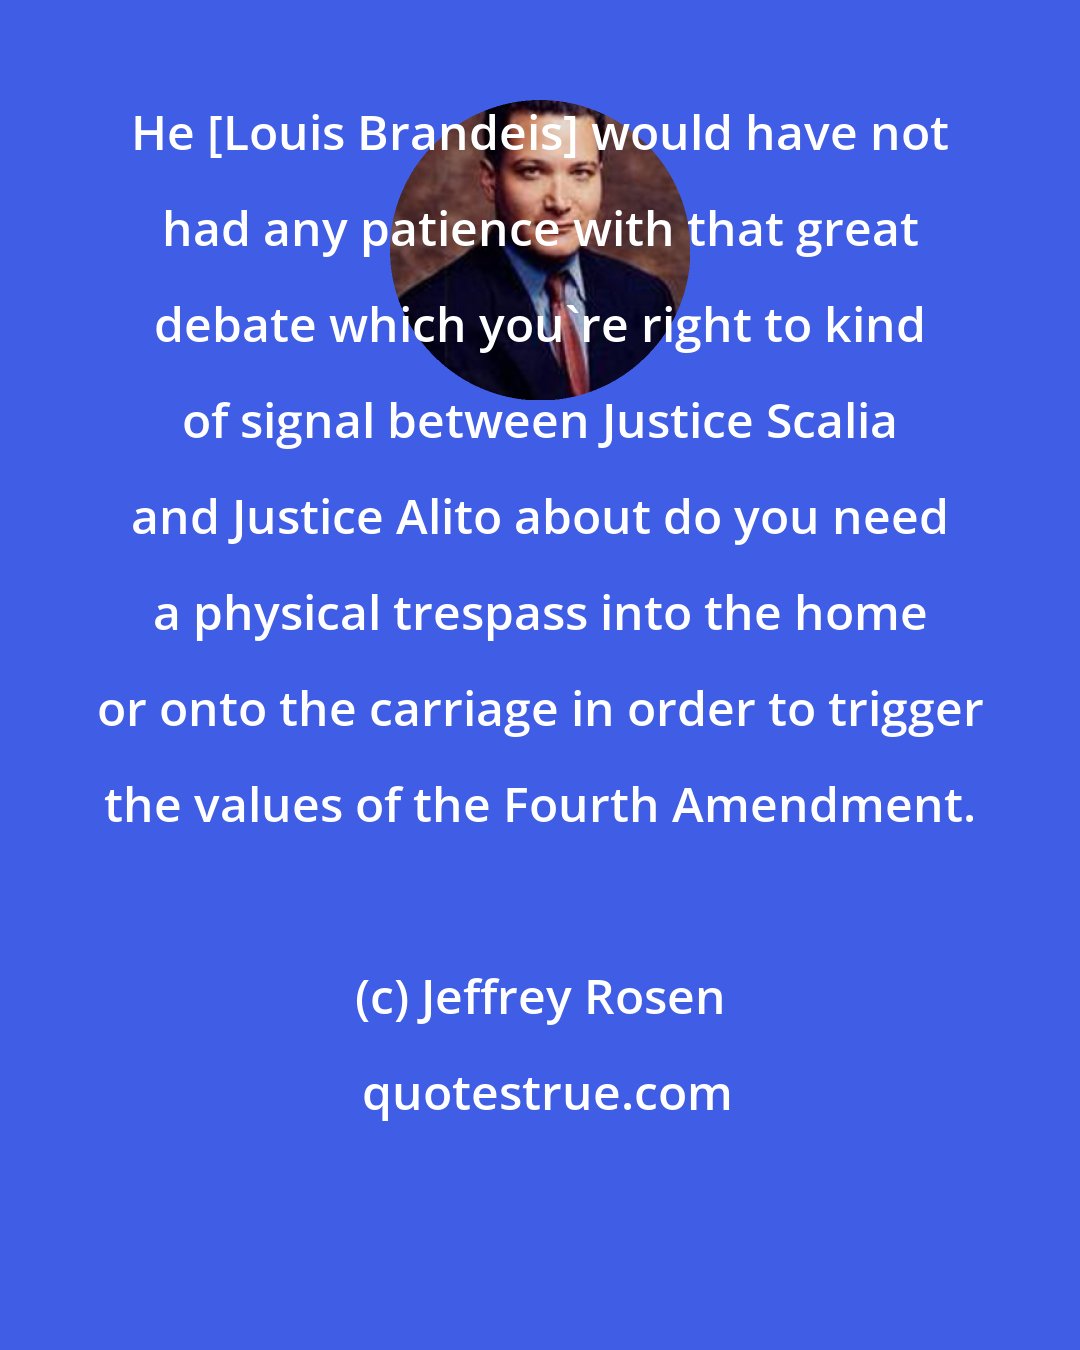 Jeffrey Rosen: He [Louis Brandeis] would have not had any patience with that great debate which you're right to kind of signal between Justice Scalia and Justice Alito about do you need a physical trespass into the home or onto the carriage in order to trigger the values of the Fourth Amendment.